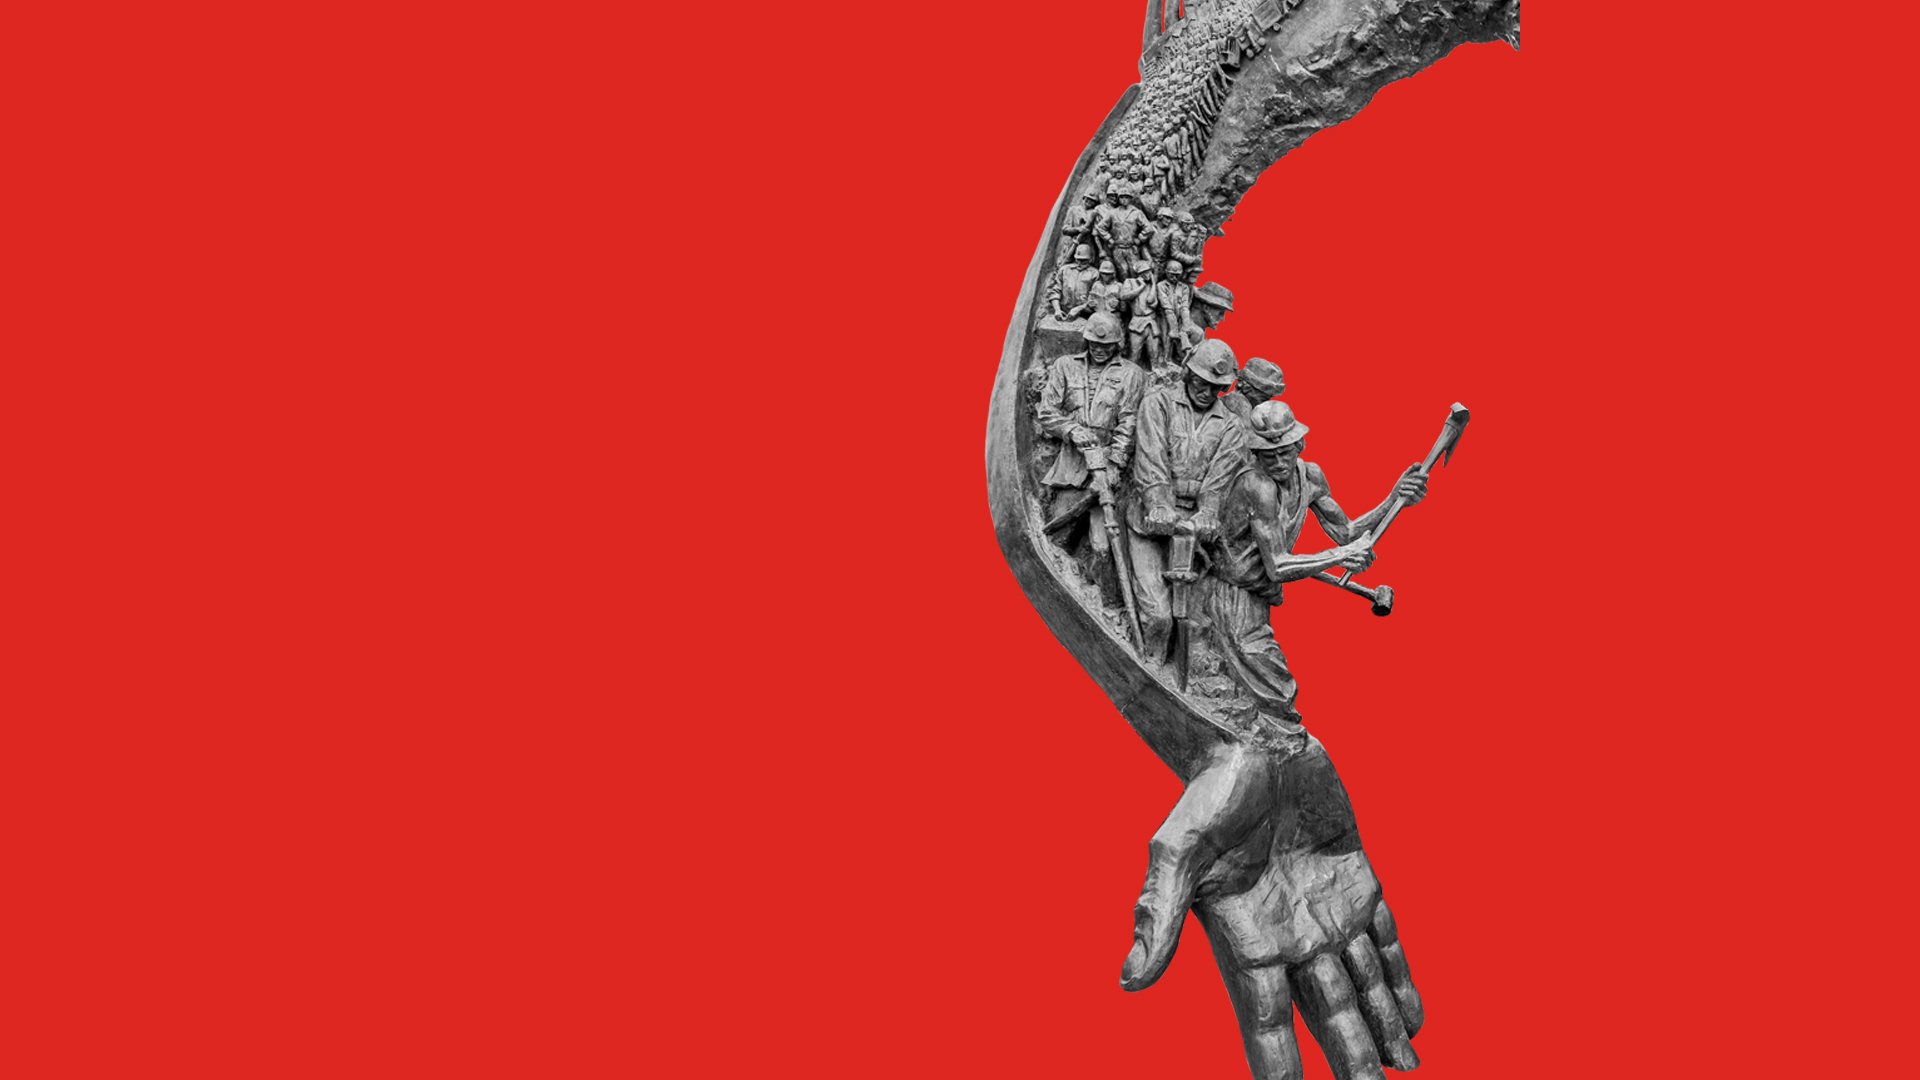 statue on red background